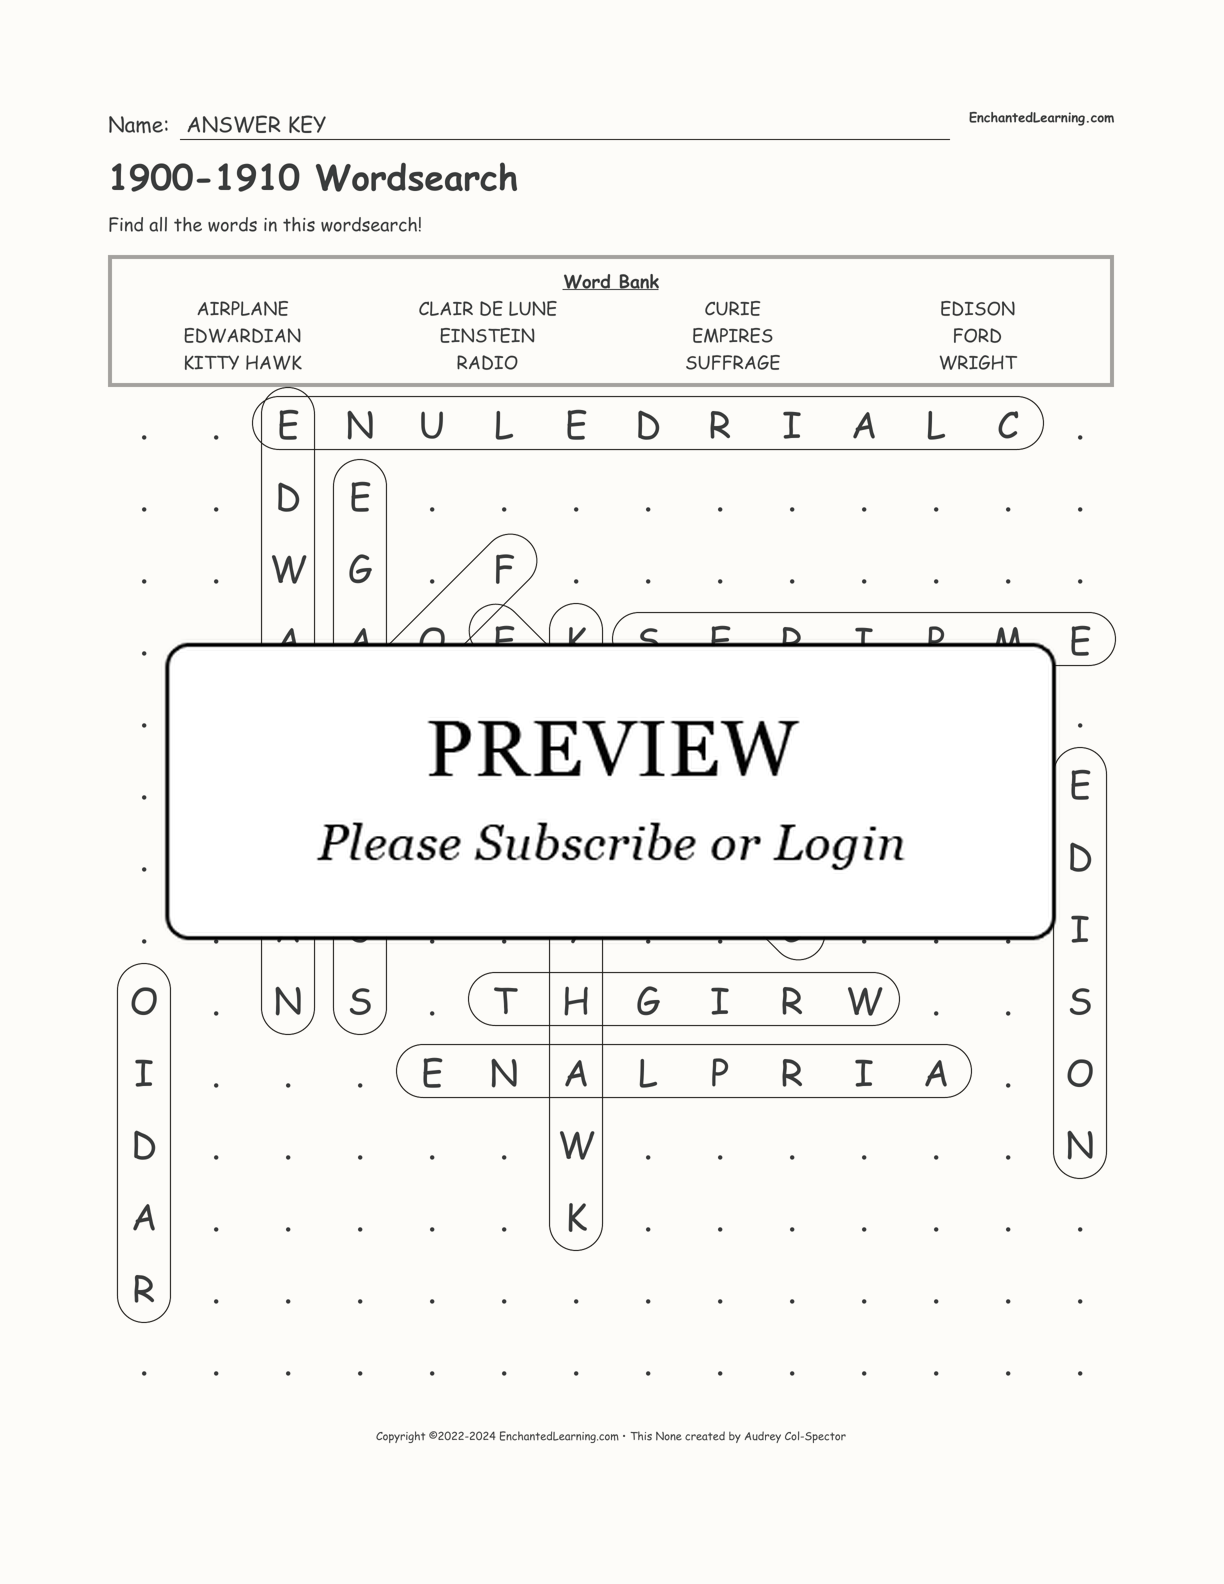 1900-1910 Wordsearch interactive worksheet page 2